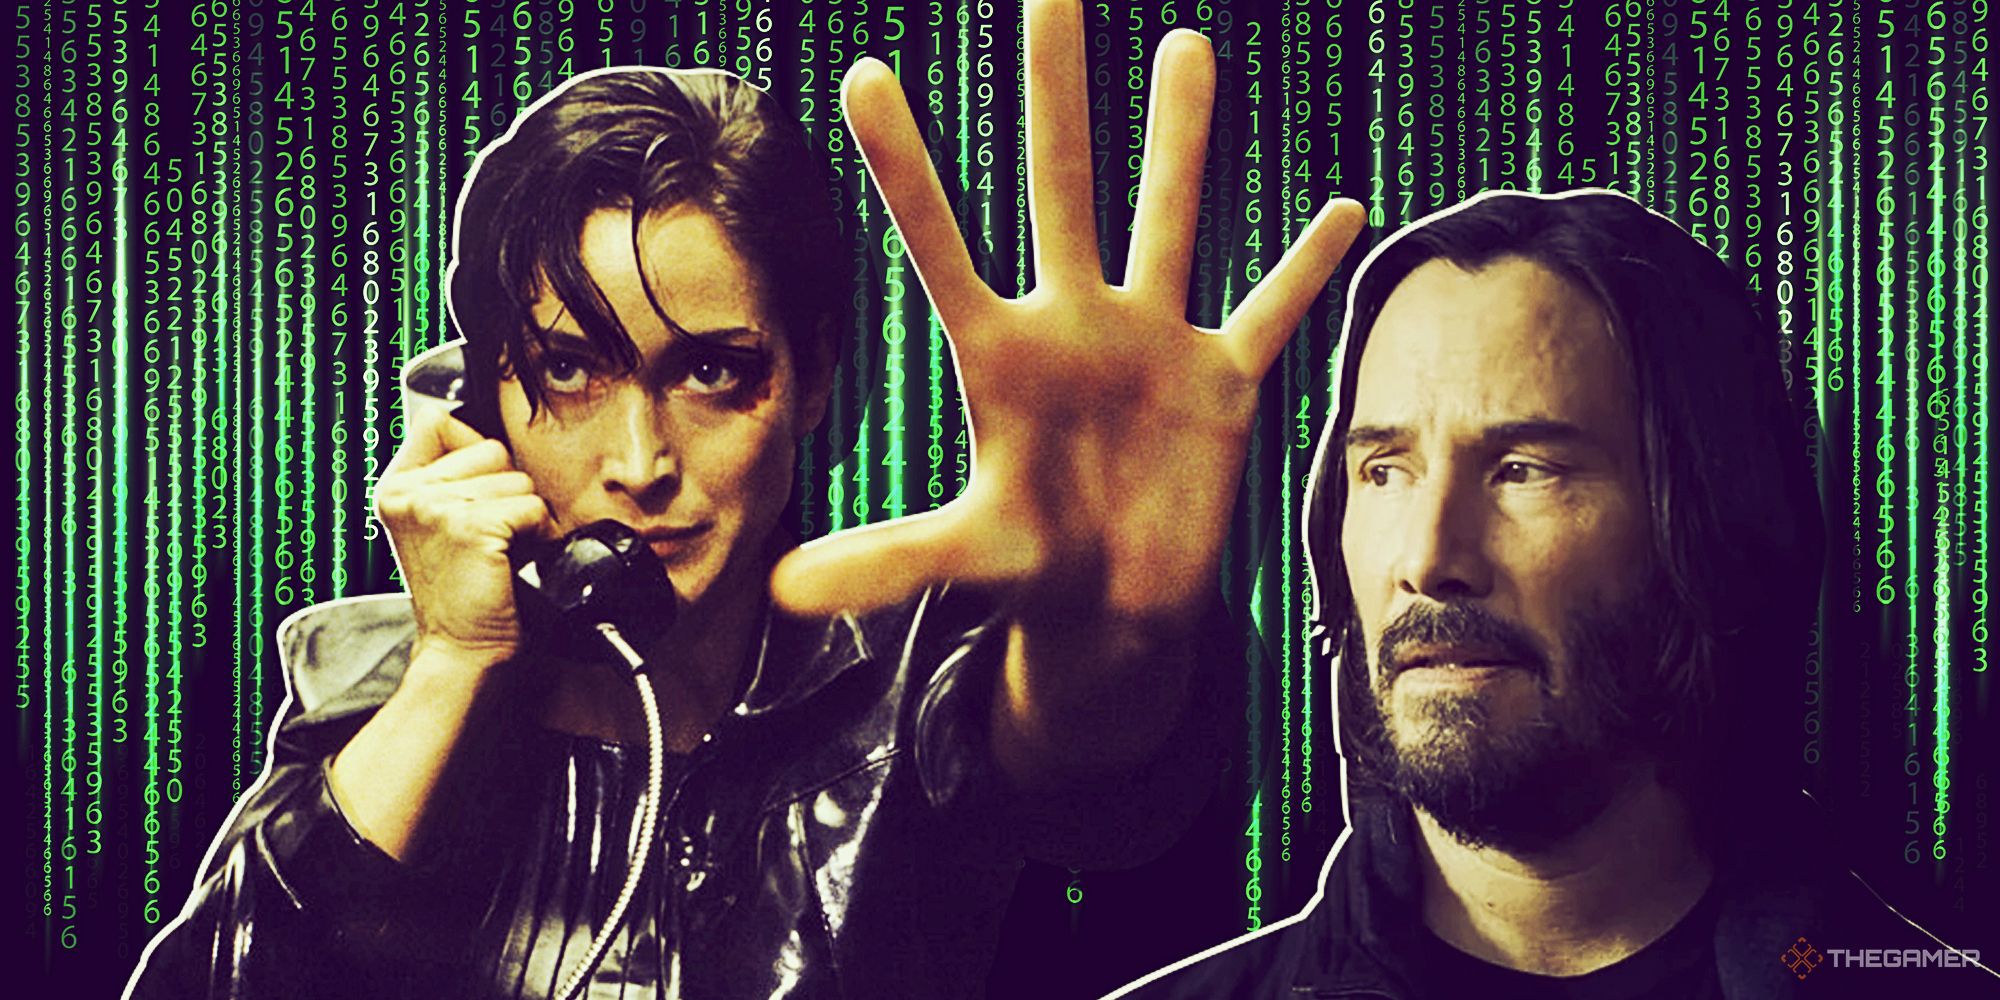 Trinity on the phone, holding her hand up in front of her. Keanu Reeves on the right. The background is the green strings of numbers from the Matrix movies